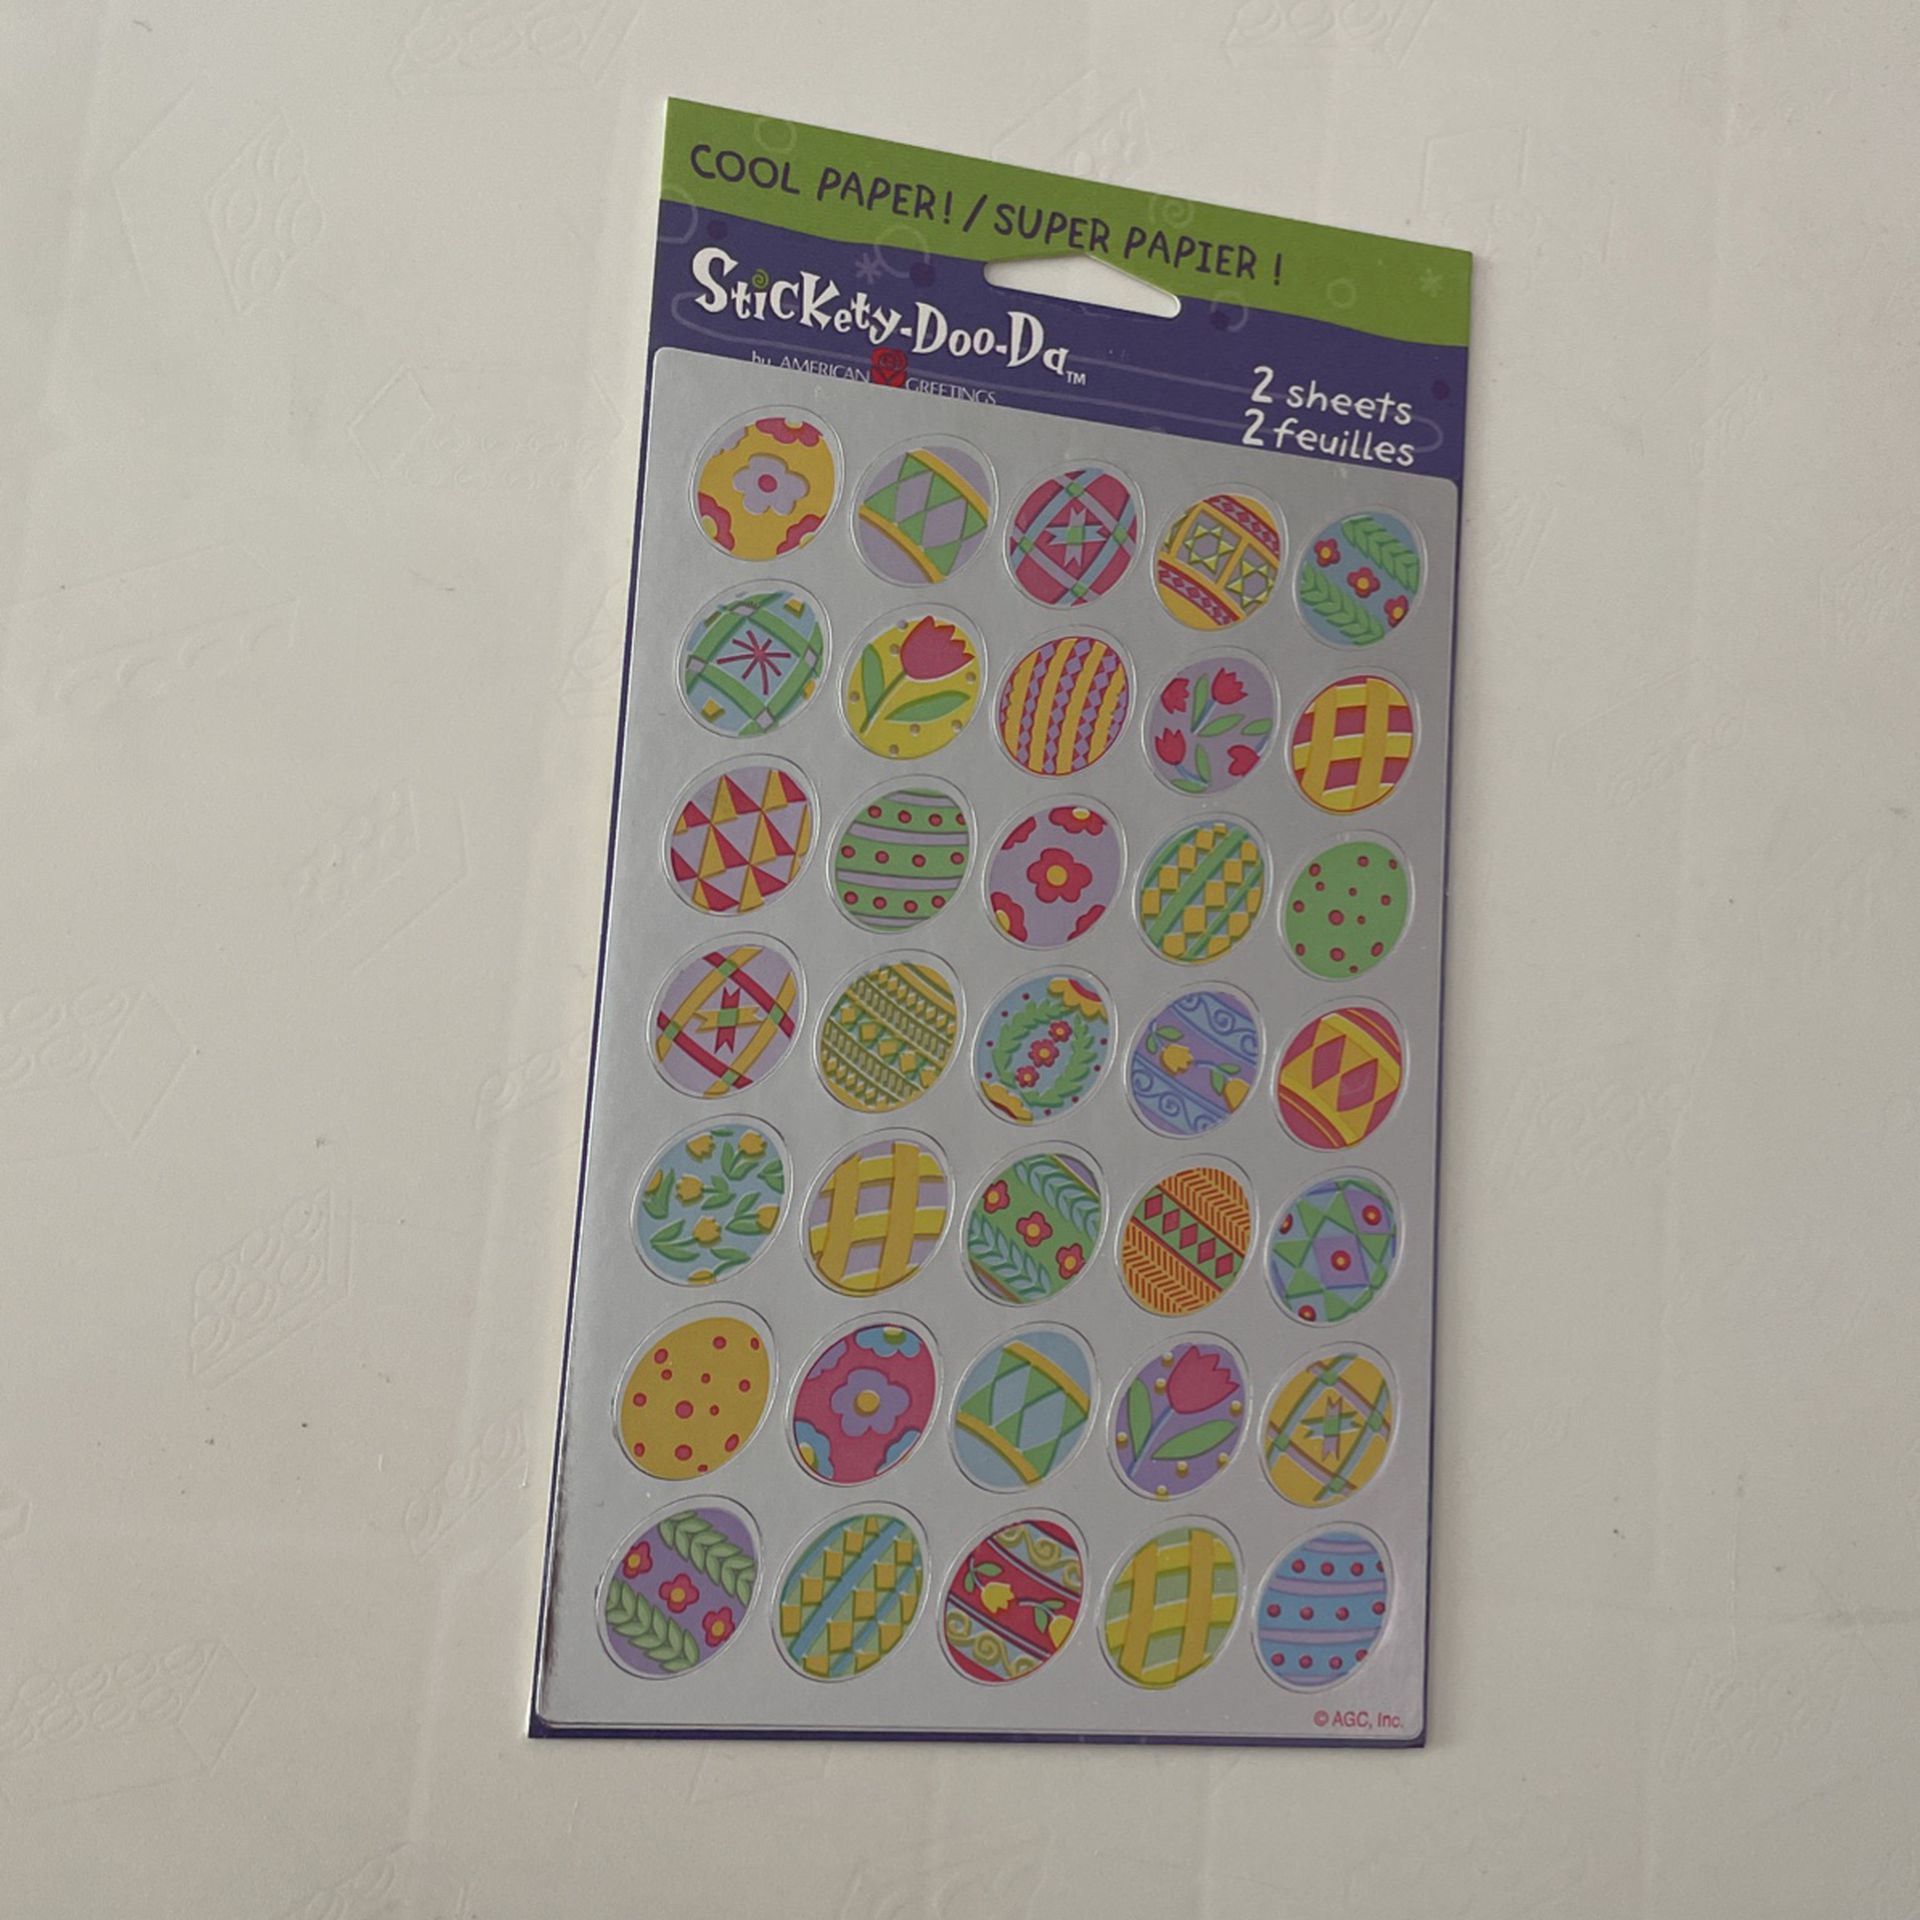 New vintage American Greetings Easter egg silver stickers Stickety Doo Da